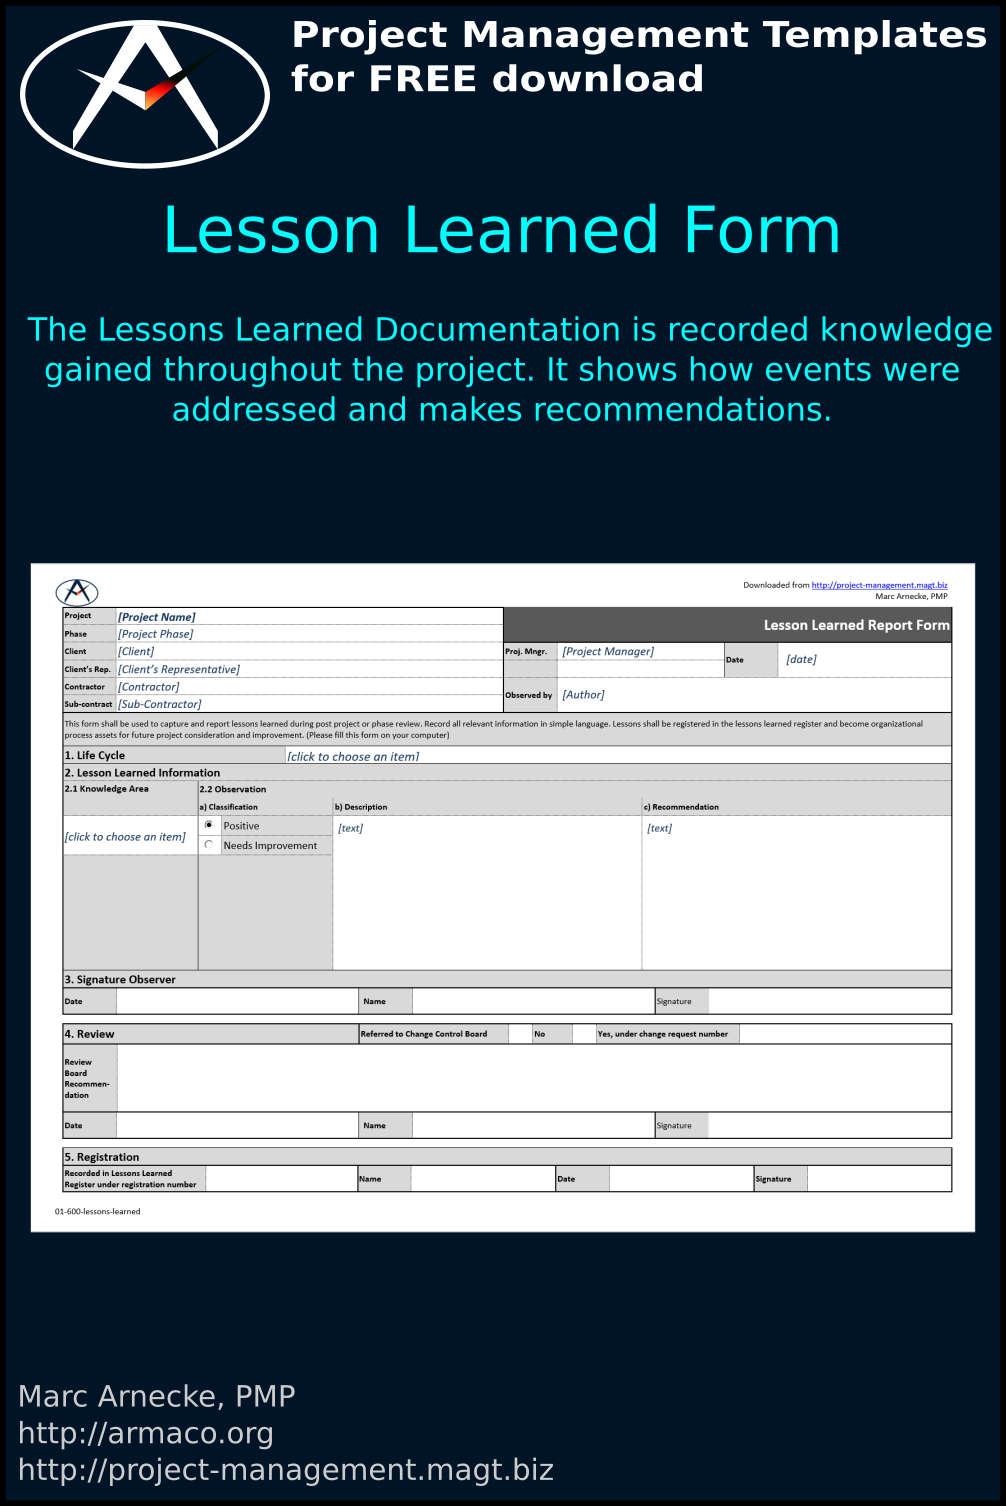 Lessons Learned Template - Free Download | Lessons Learned Report Form